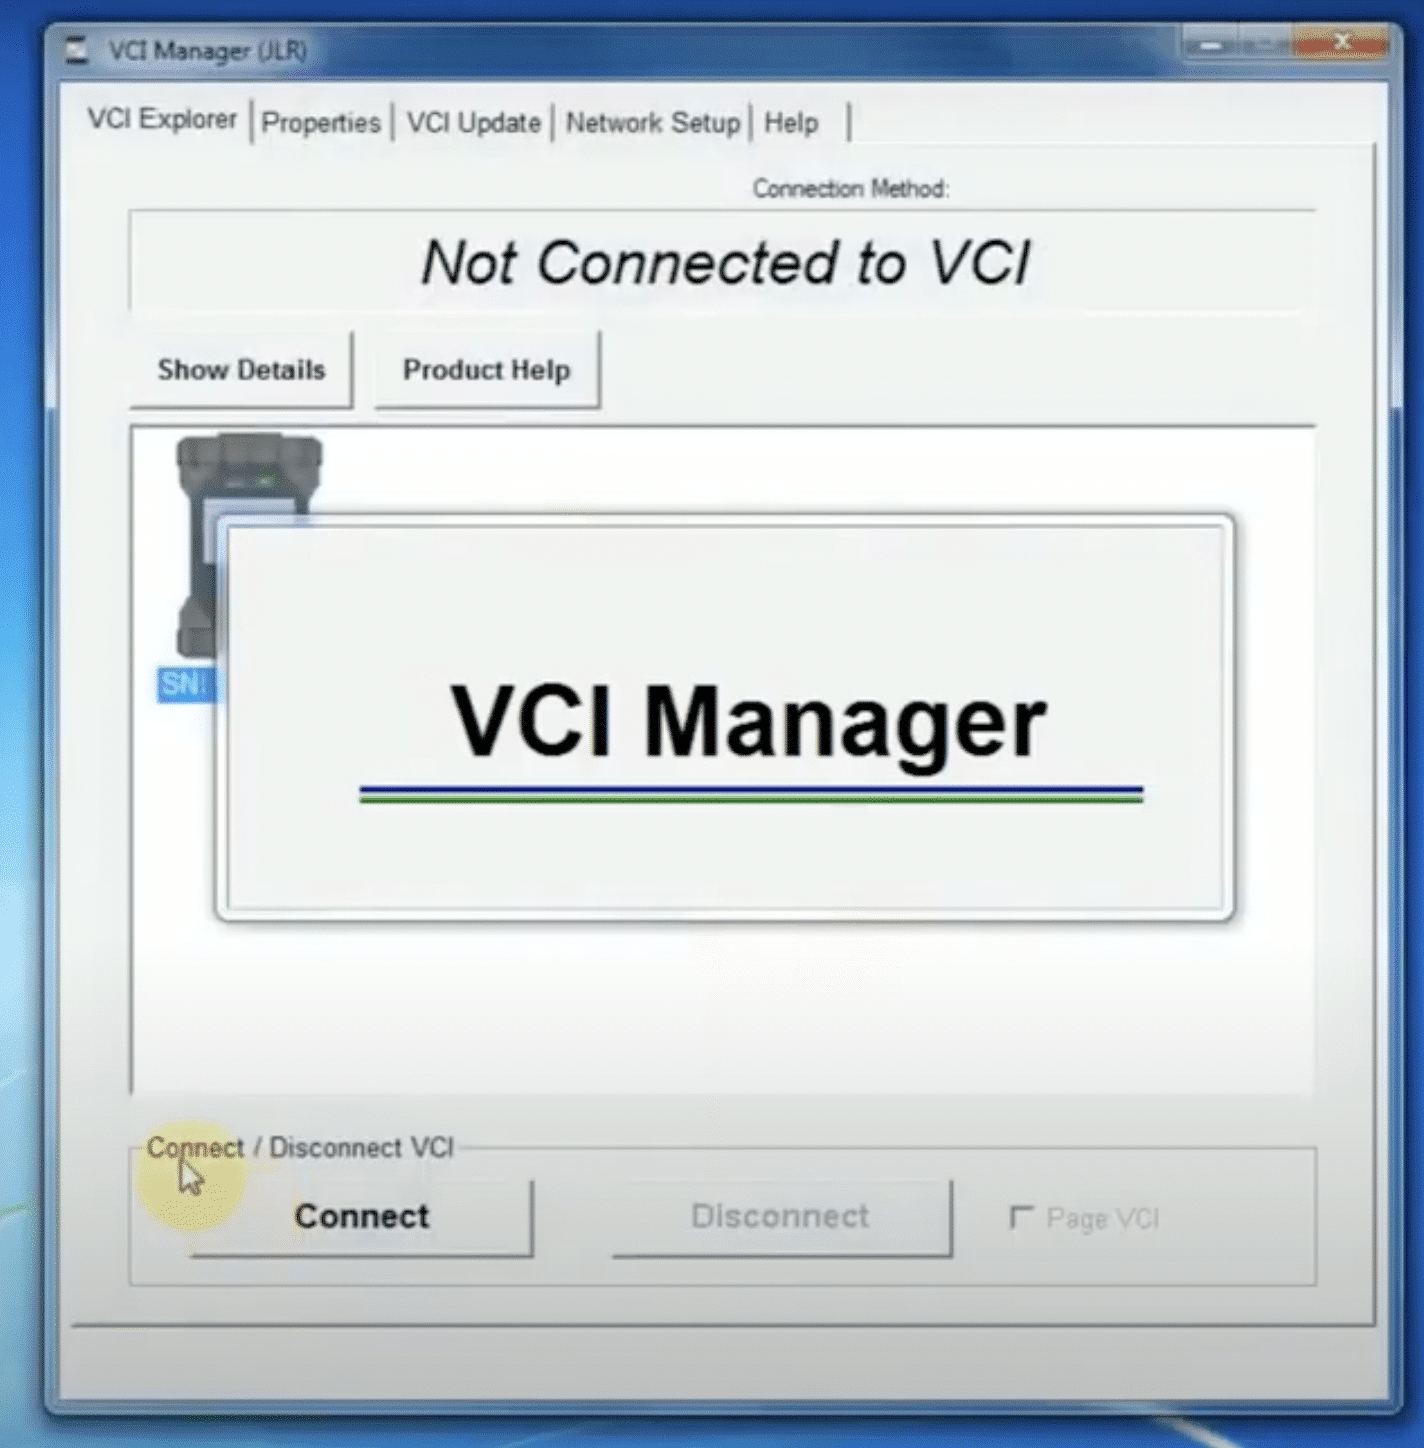 jlr doip vci manager for sdd and pathfinder